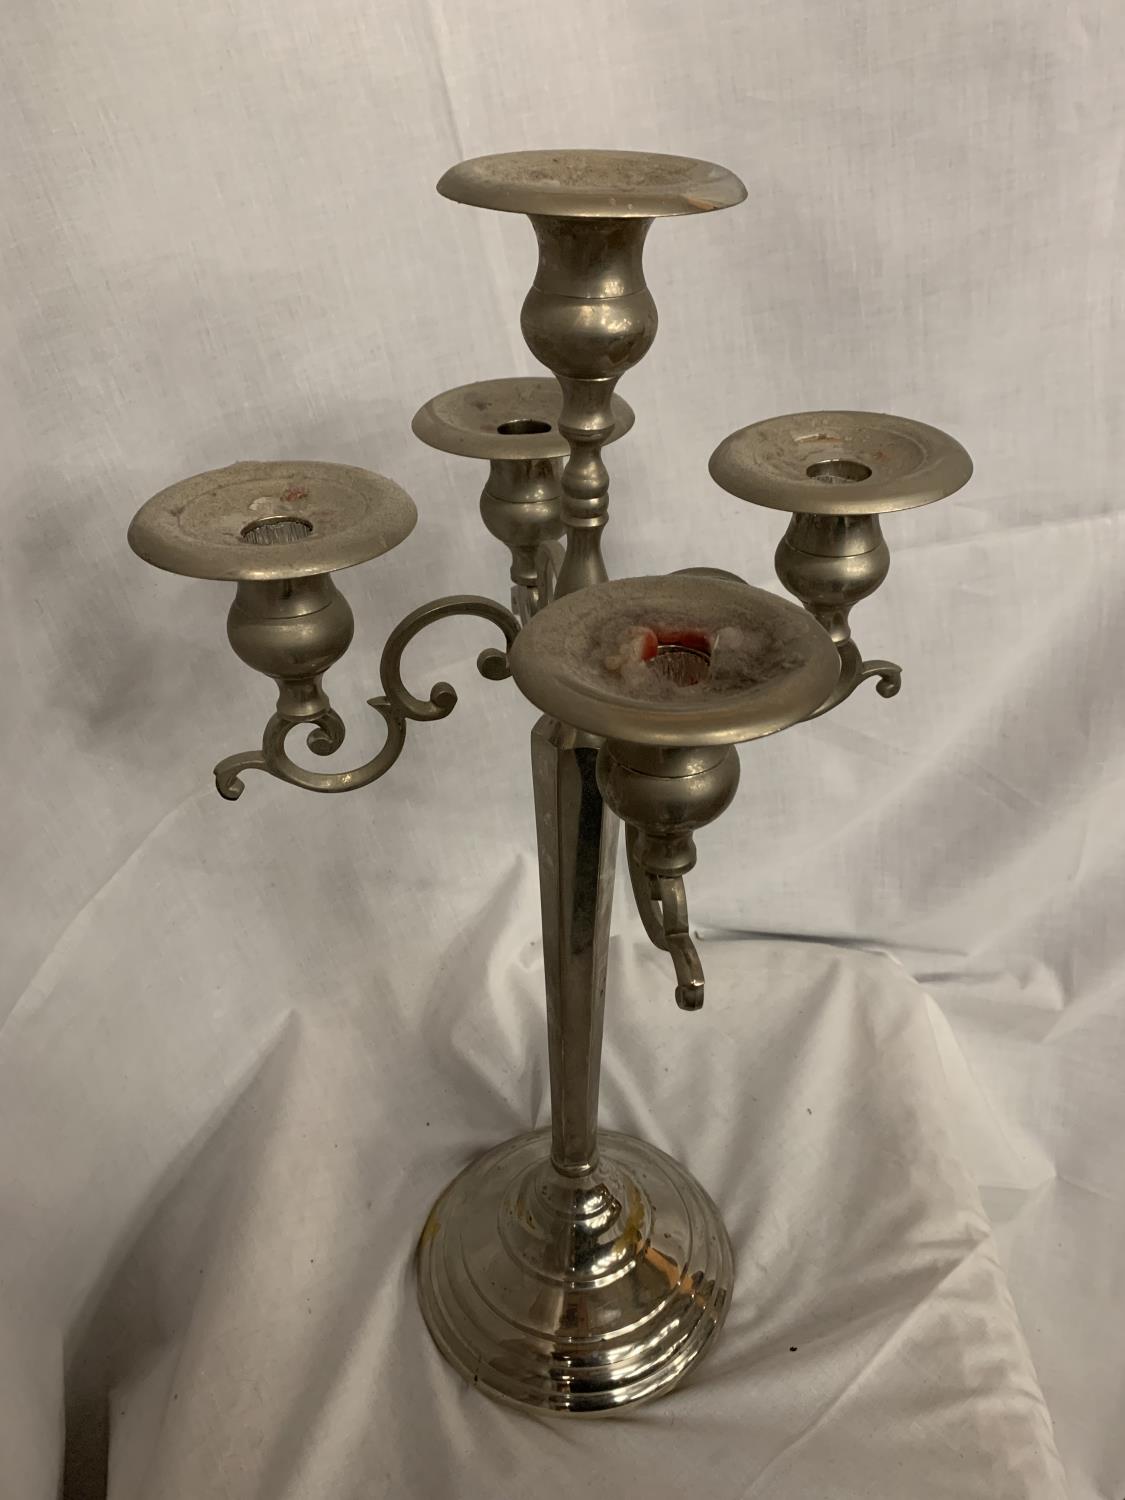 A TALL ORNATE CHROME FIVE BRANCH CANDLEABRA - Image 2 of 3